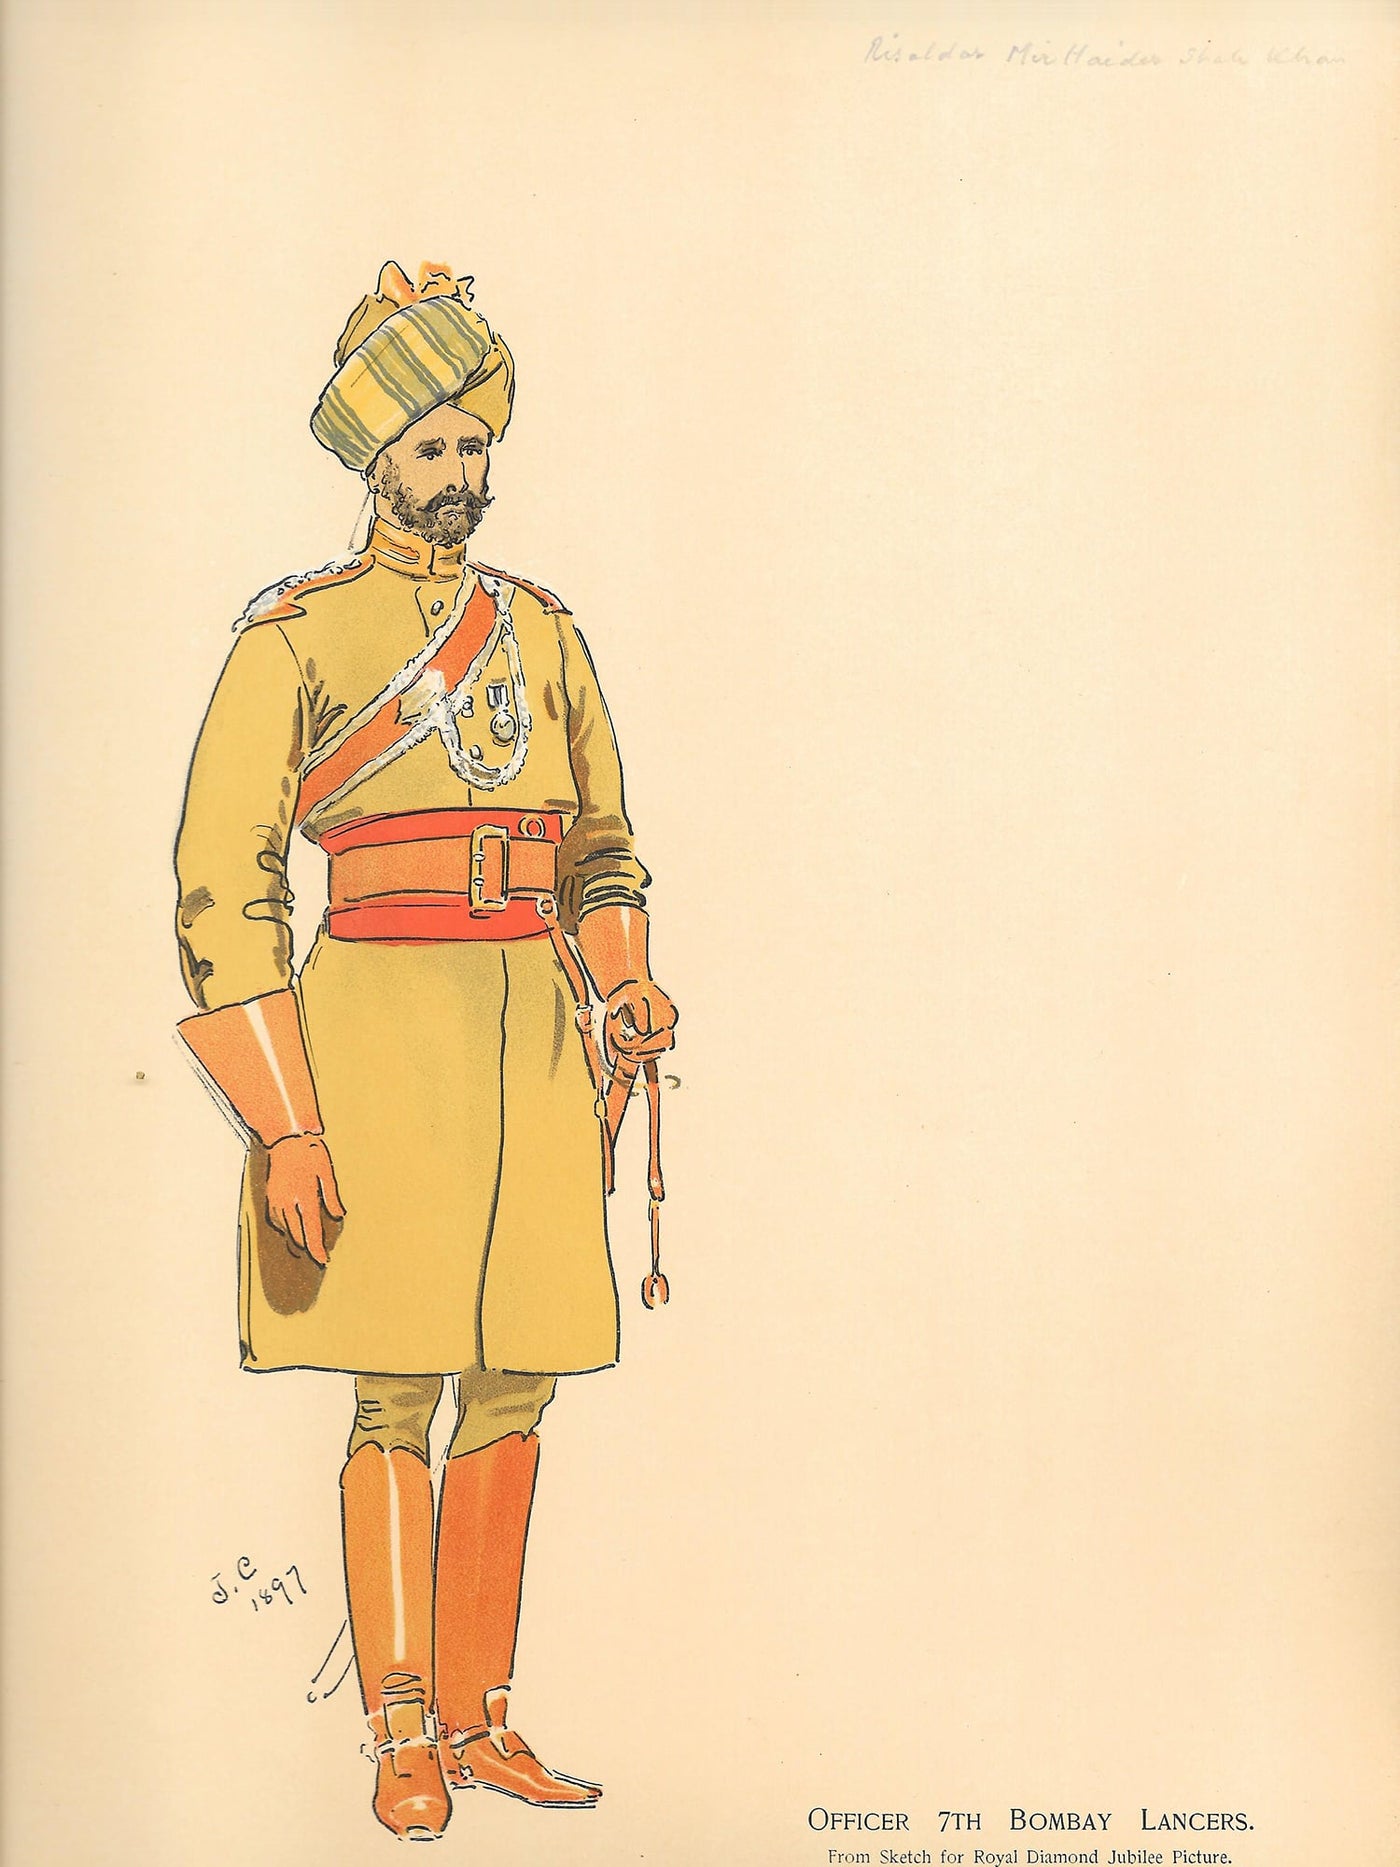 7th Bombay Lancers, British Indian Army